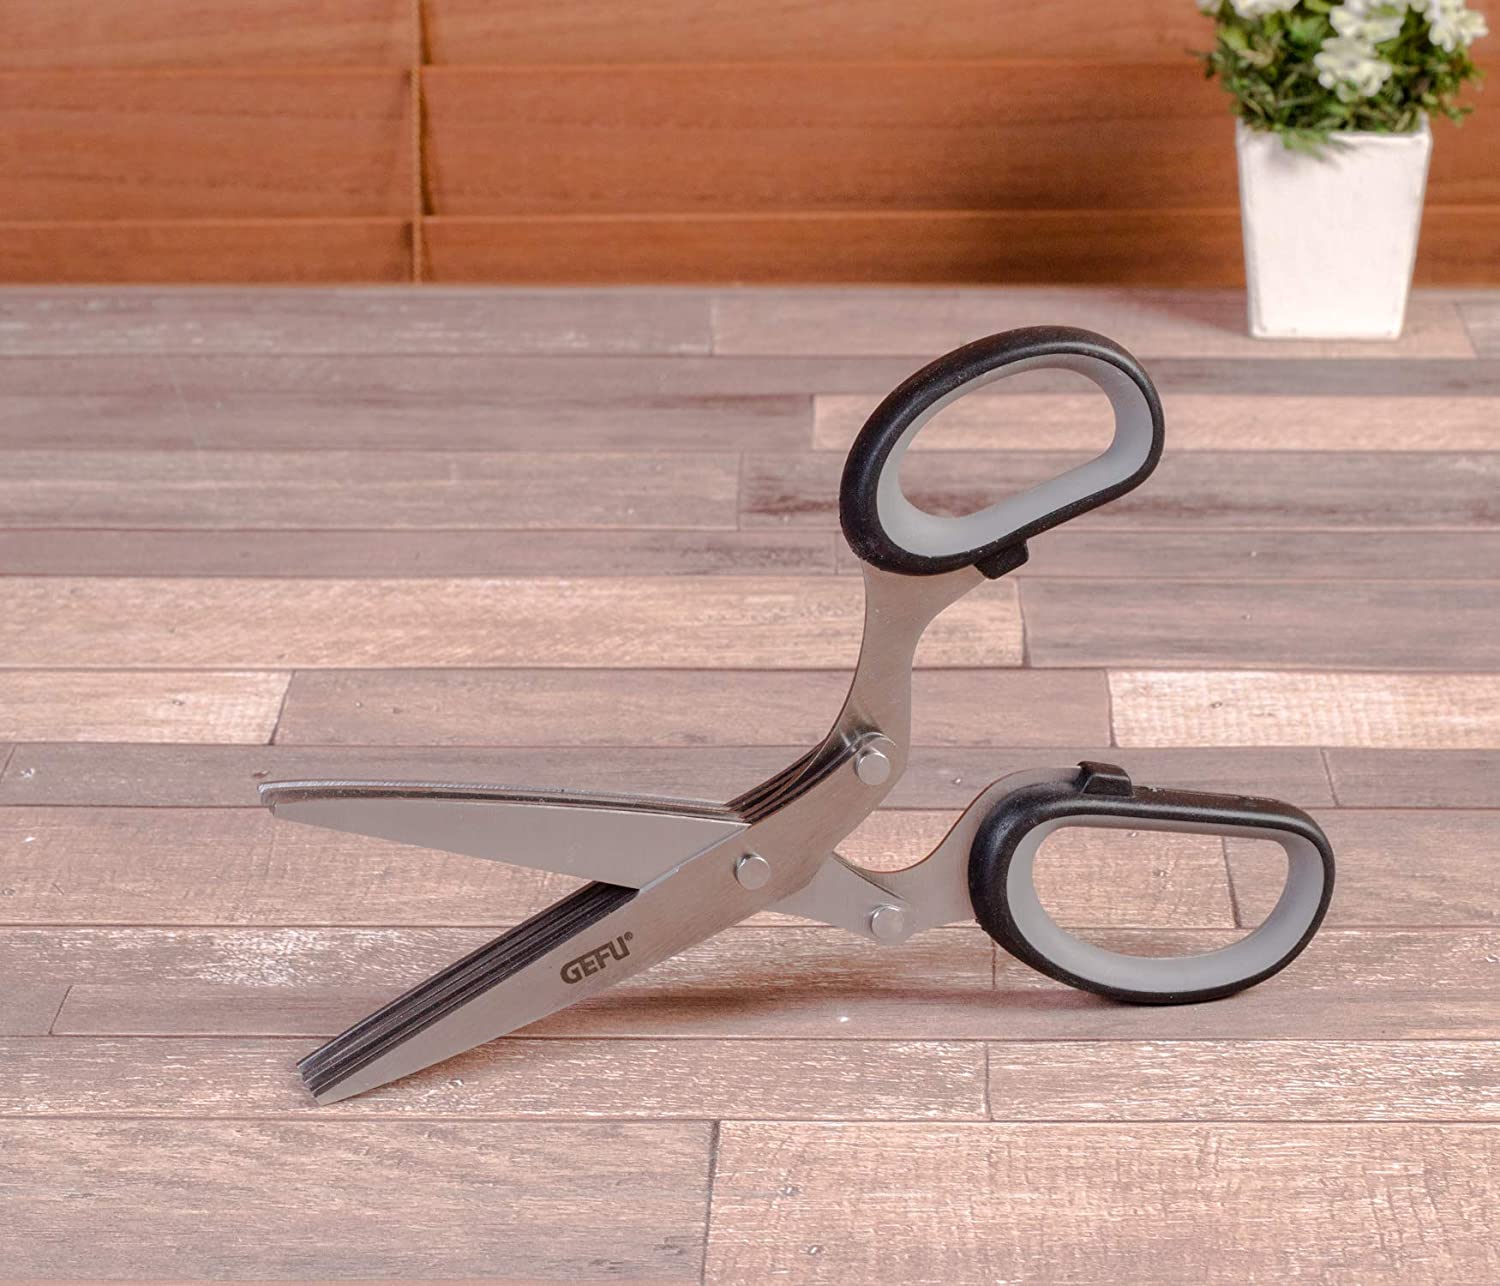 Gefu 12660 Herb Scissors with Cleaning Comb